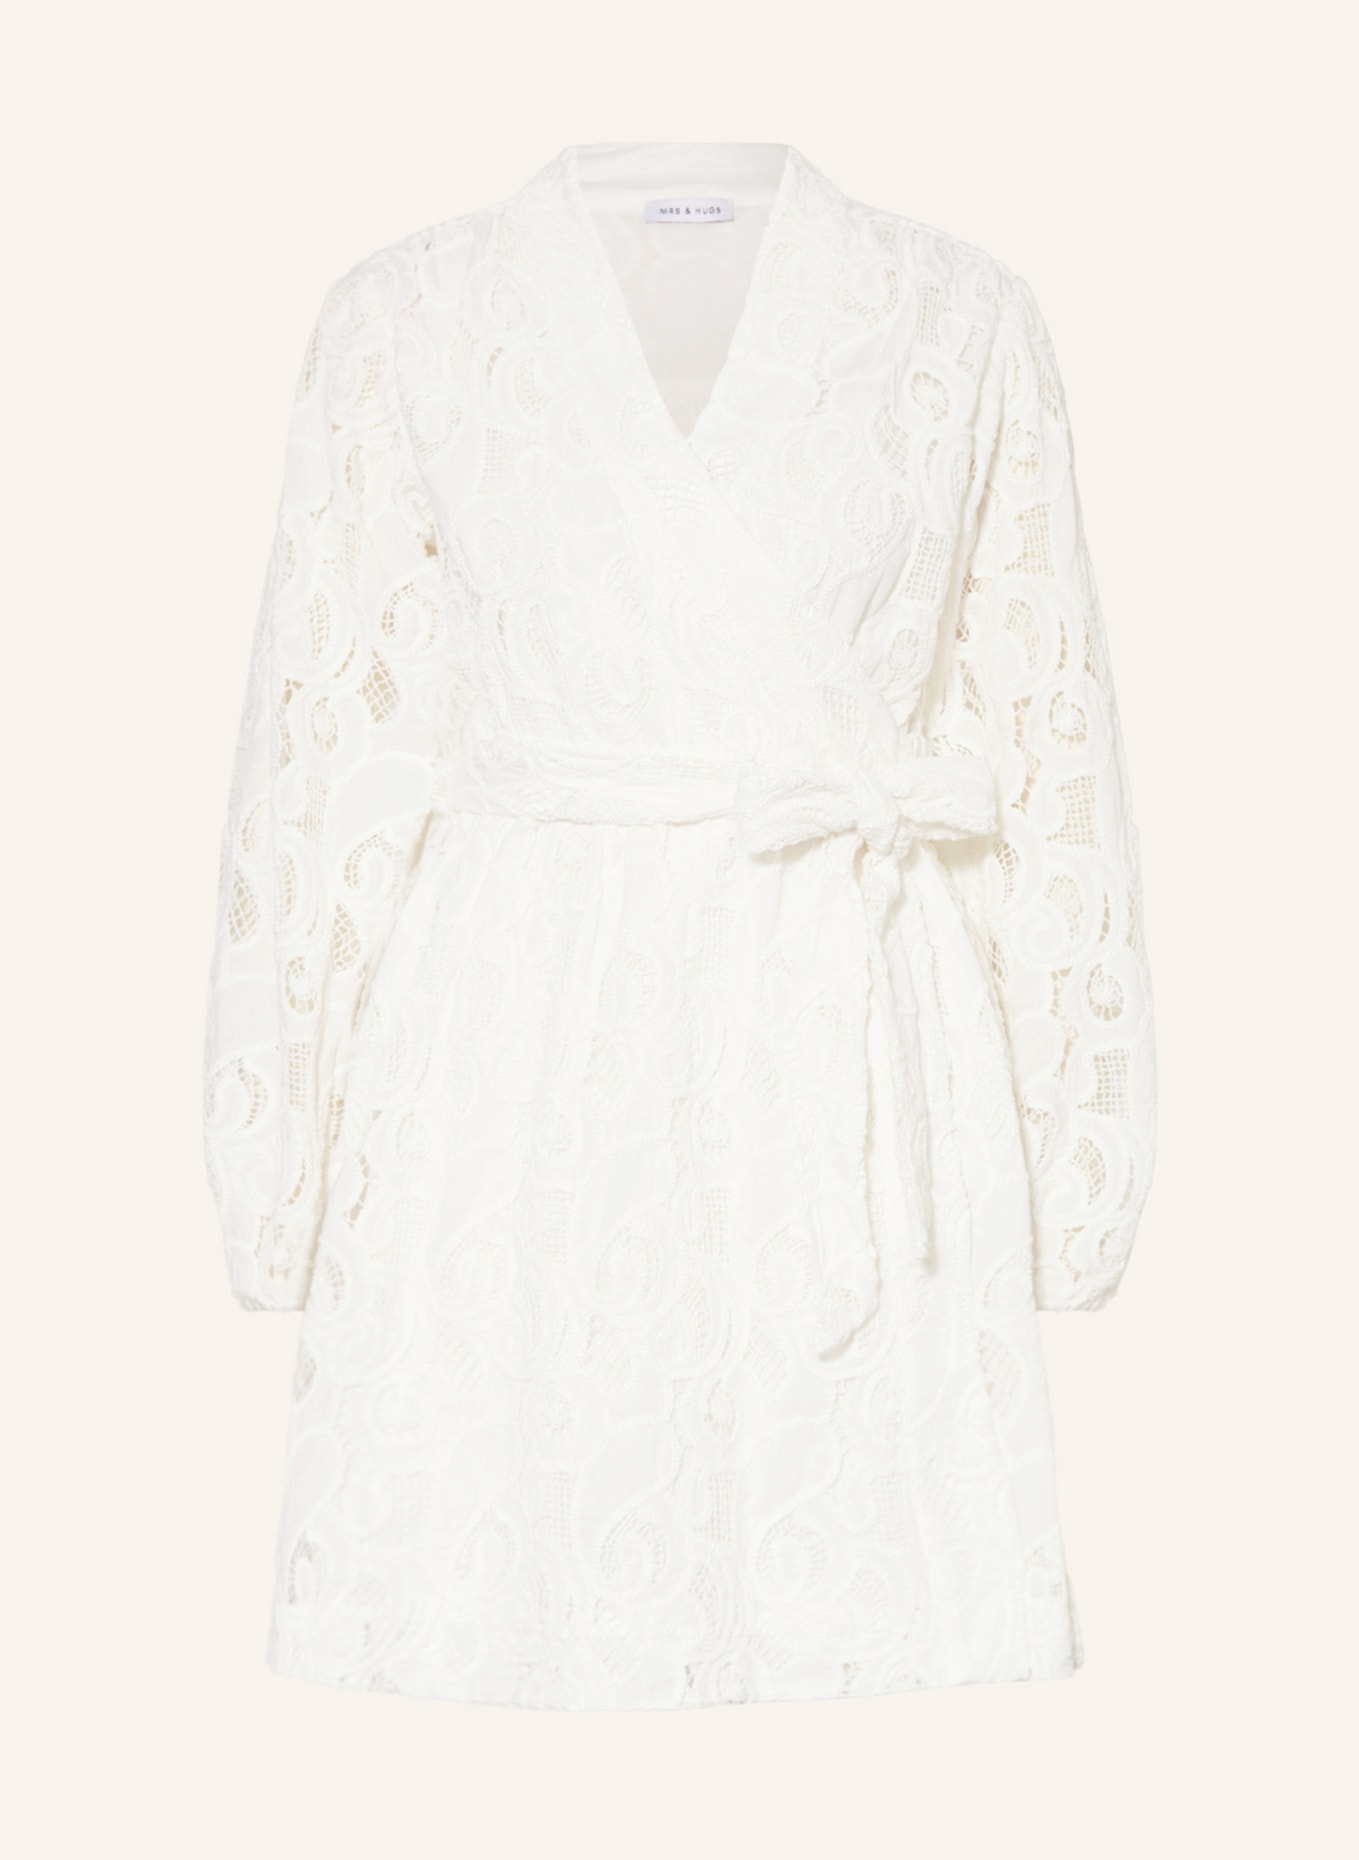 MRS & HUGS Wrap dress made of lace, Color: CREAM (Image 1)